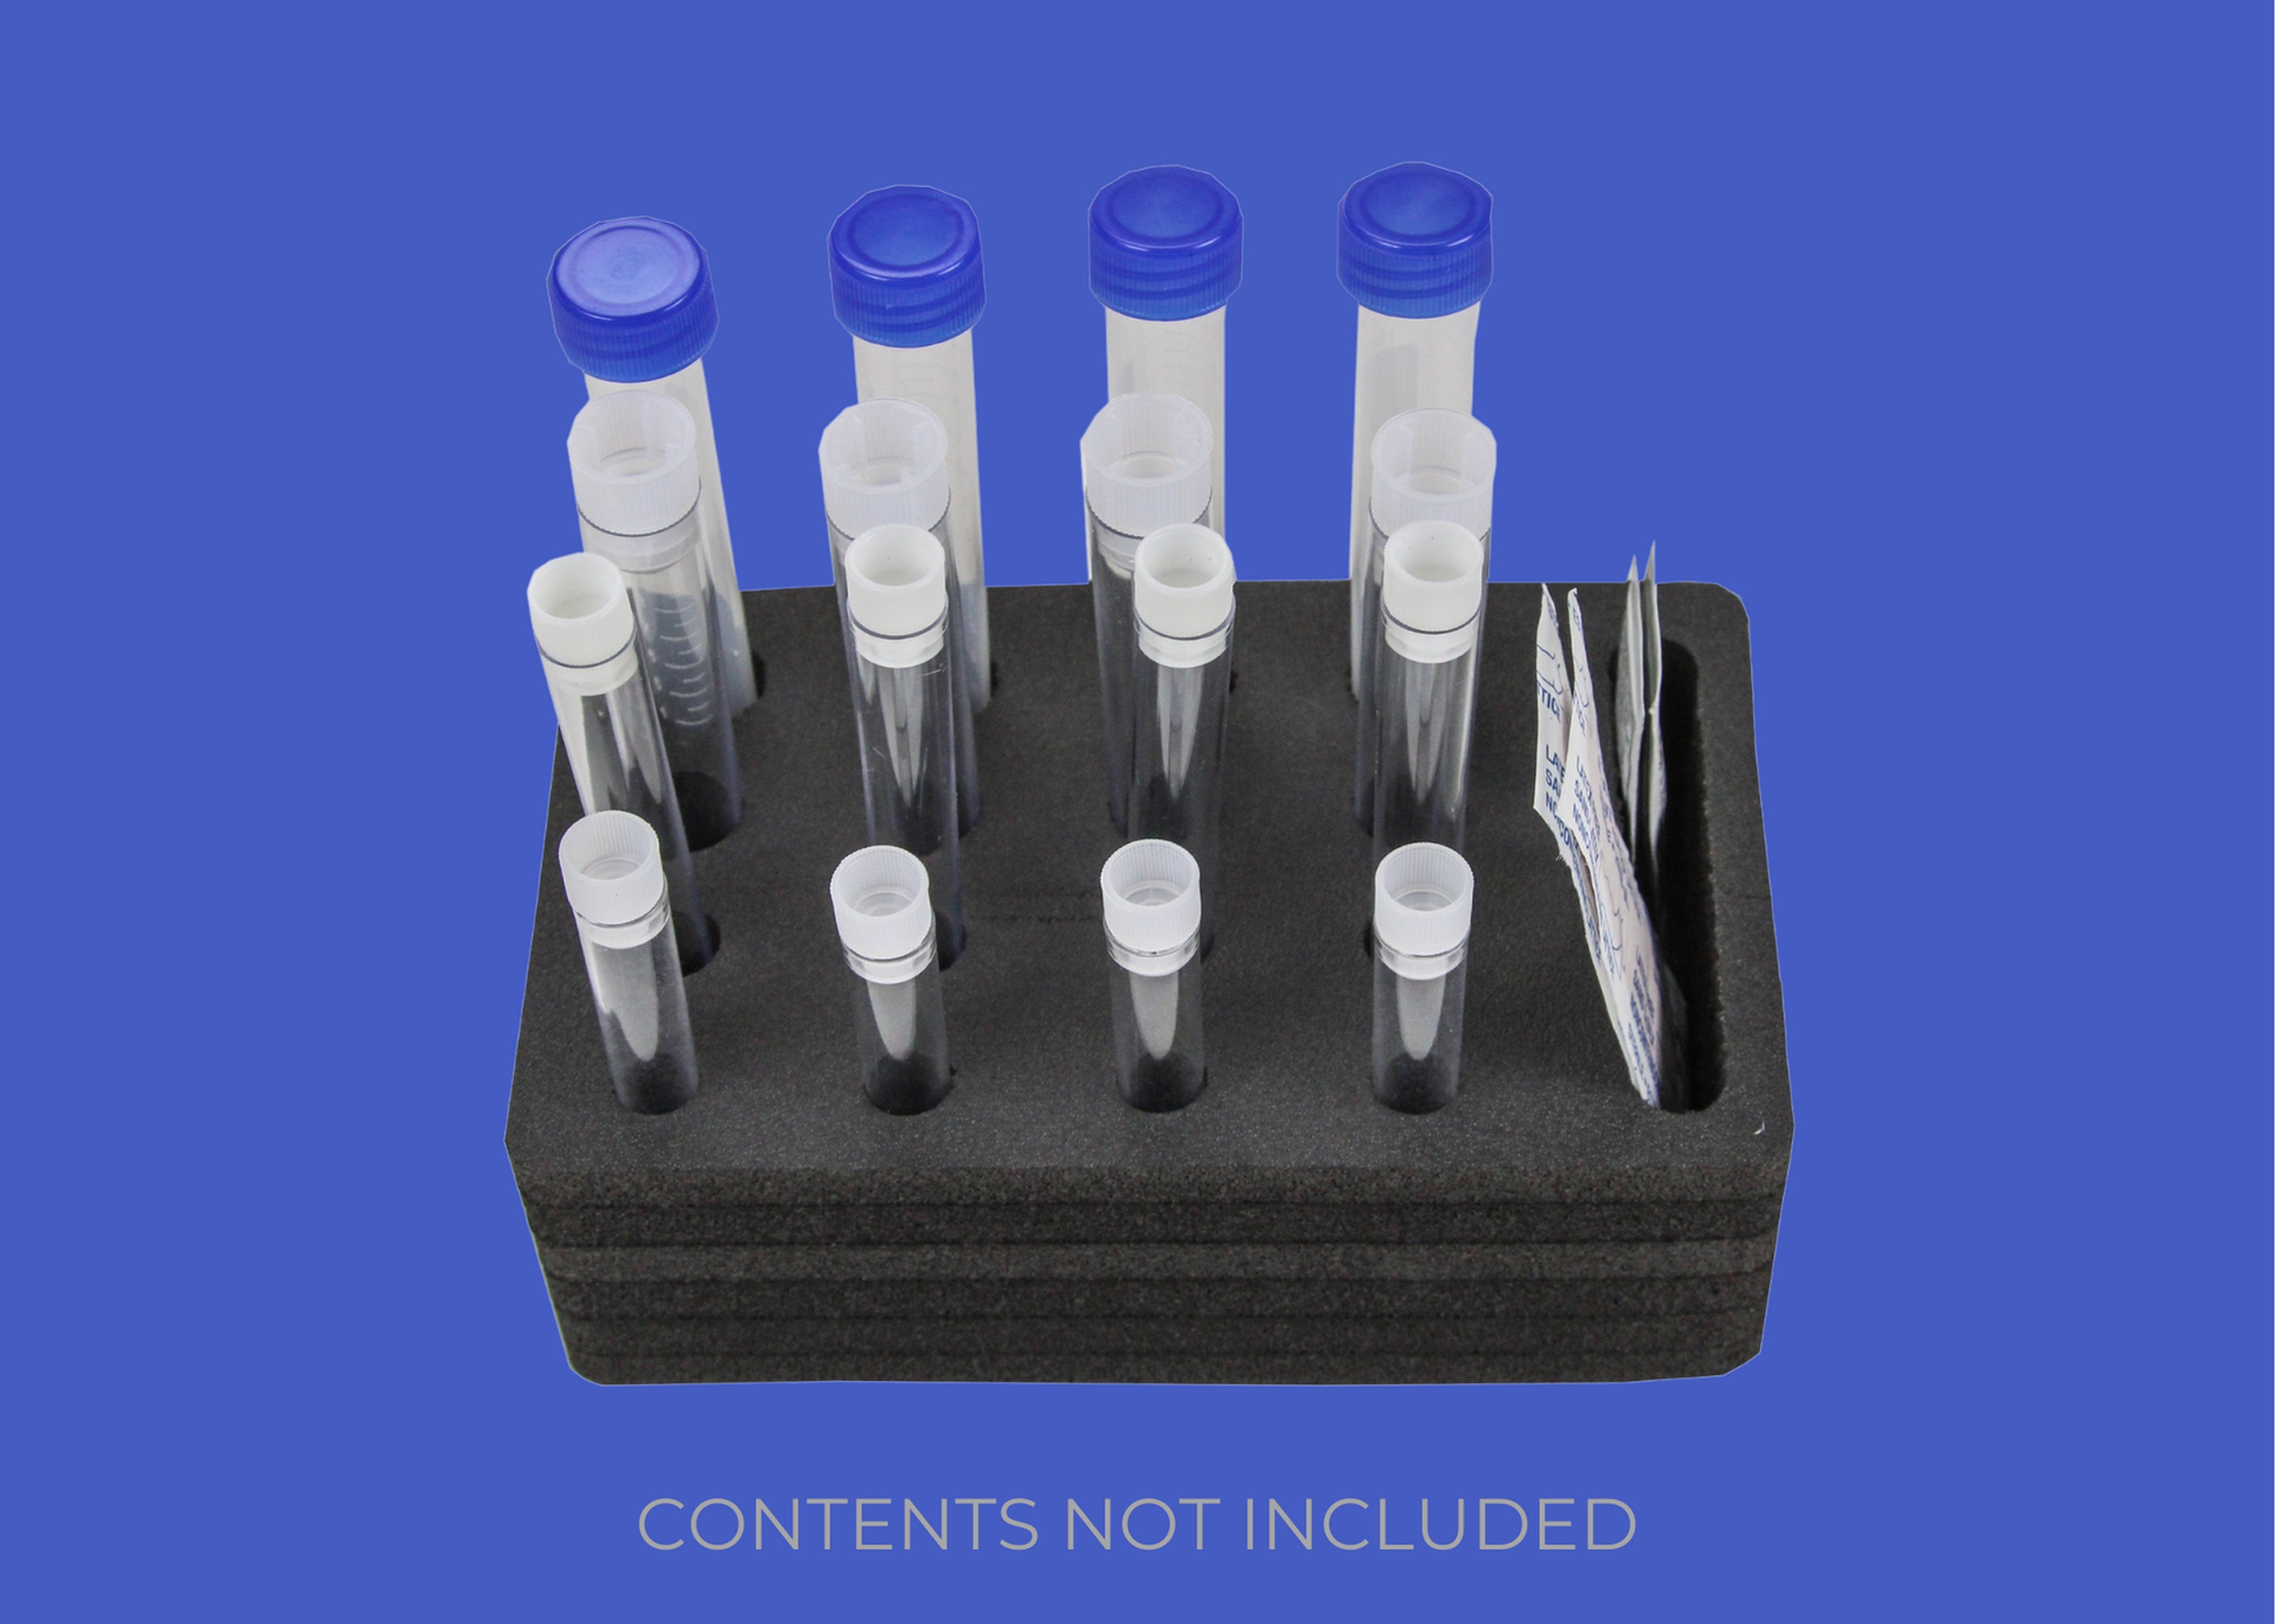 Personal Travel Test Tube Holder Rack Foam Lab Storage Supplies Compact Mini St Transport Holds 16 Tubes Fits up to 11mm 13mm 15mm 17mm Diameter